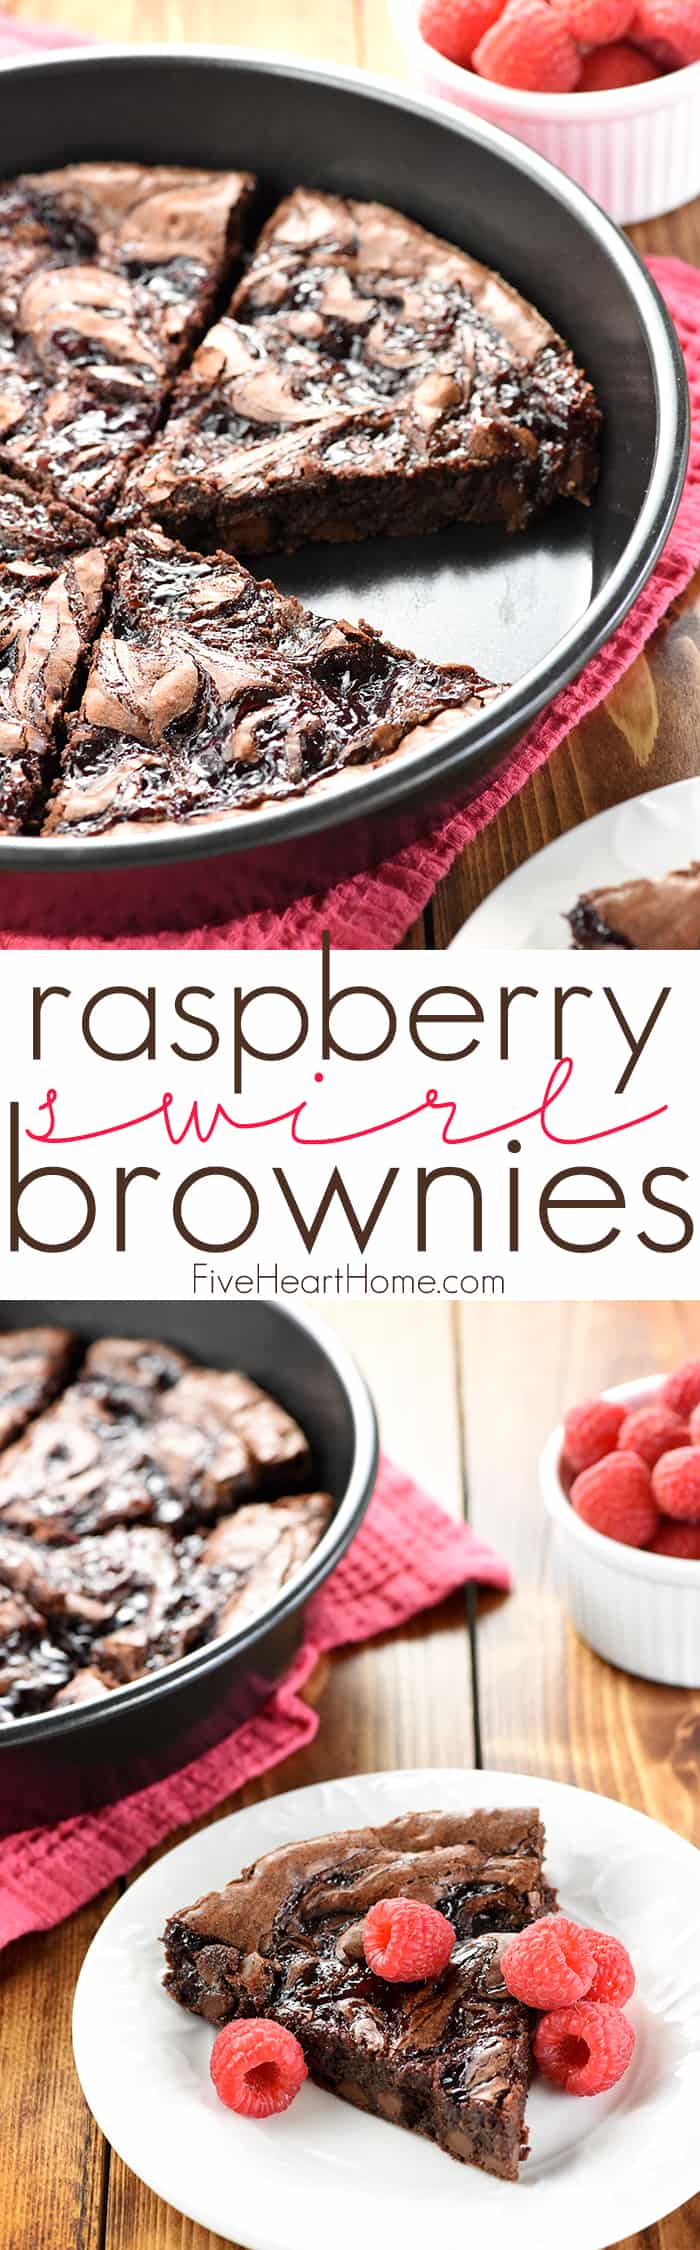 Raspberry Swirl Brownies ~ fudgy brownies are studded with chocolate chips, topped with raspberry preserves, and sliced into wedges in this rich, decadent dessert, perfect for Valentine's Day or as an anytime sweet treat! | FiveHeartHome.com via @fivehearthome